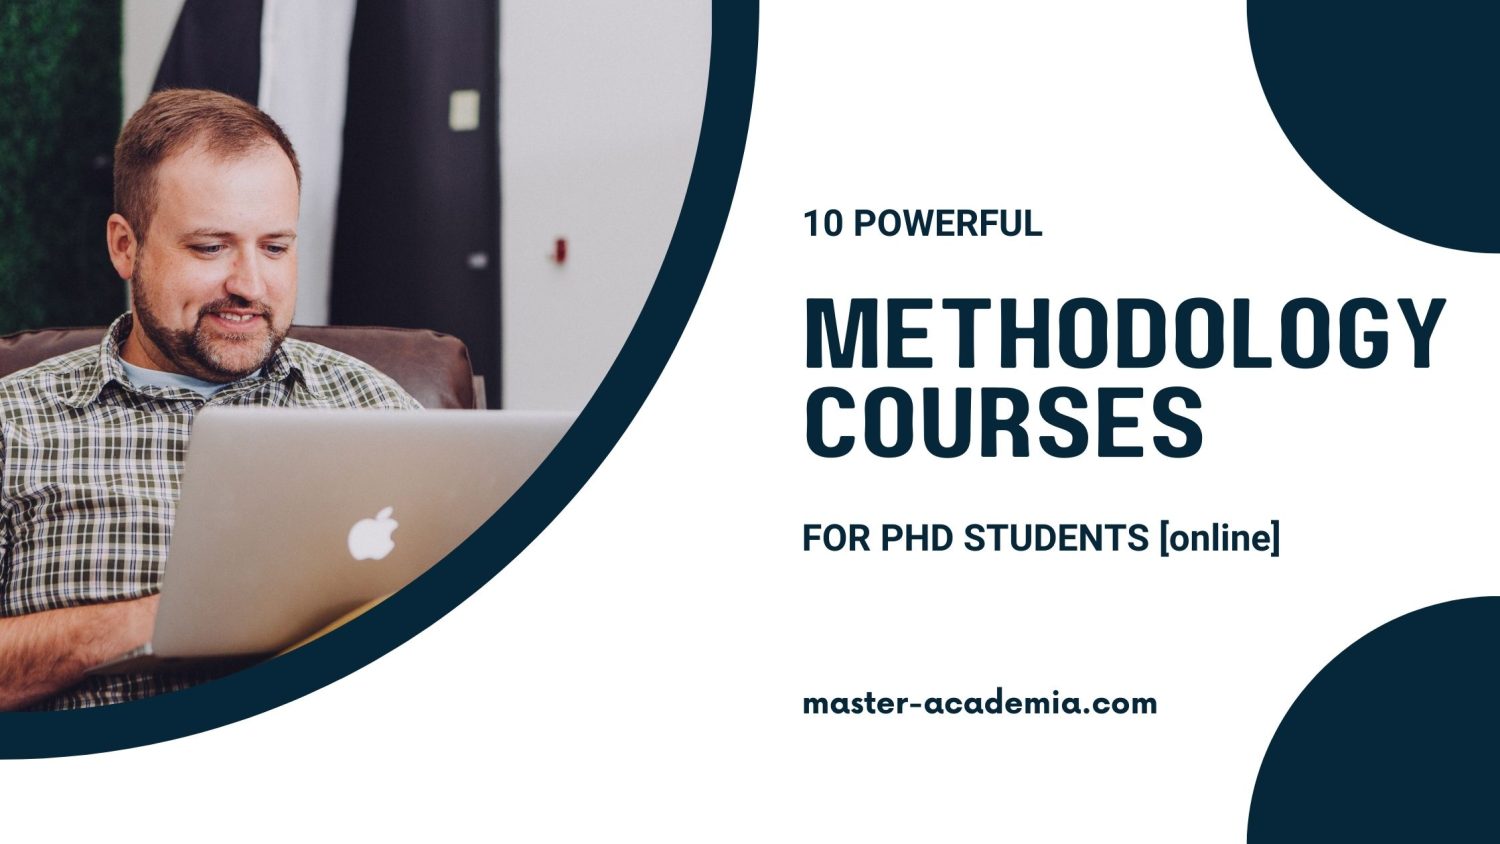 online courses for phd students